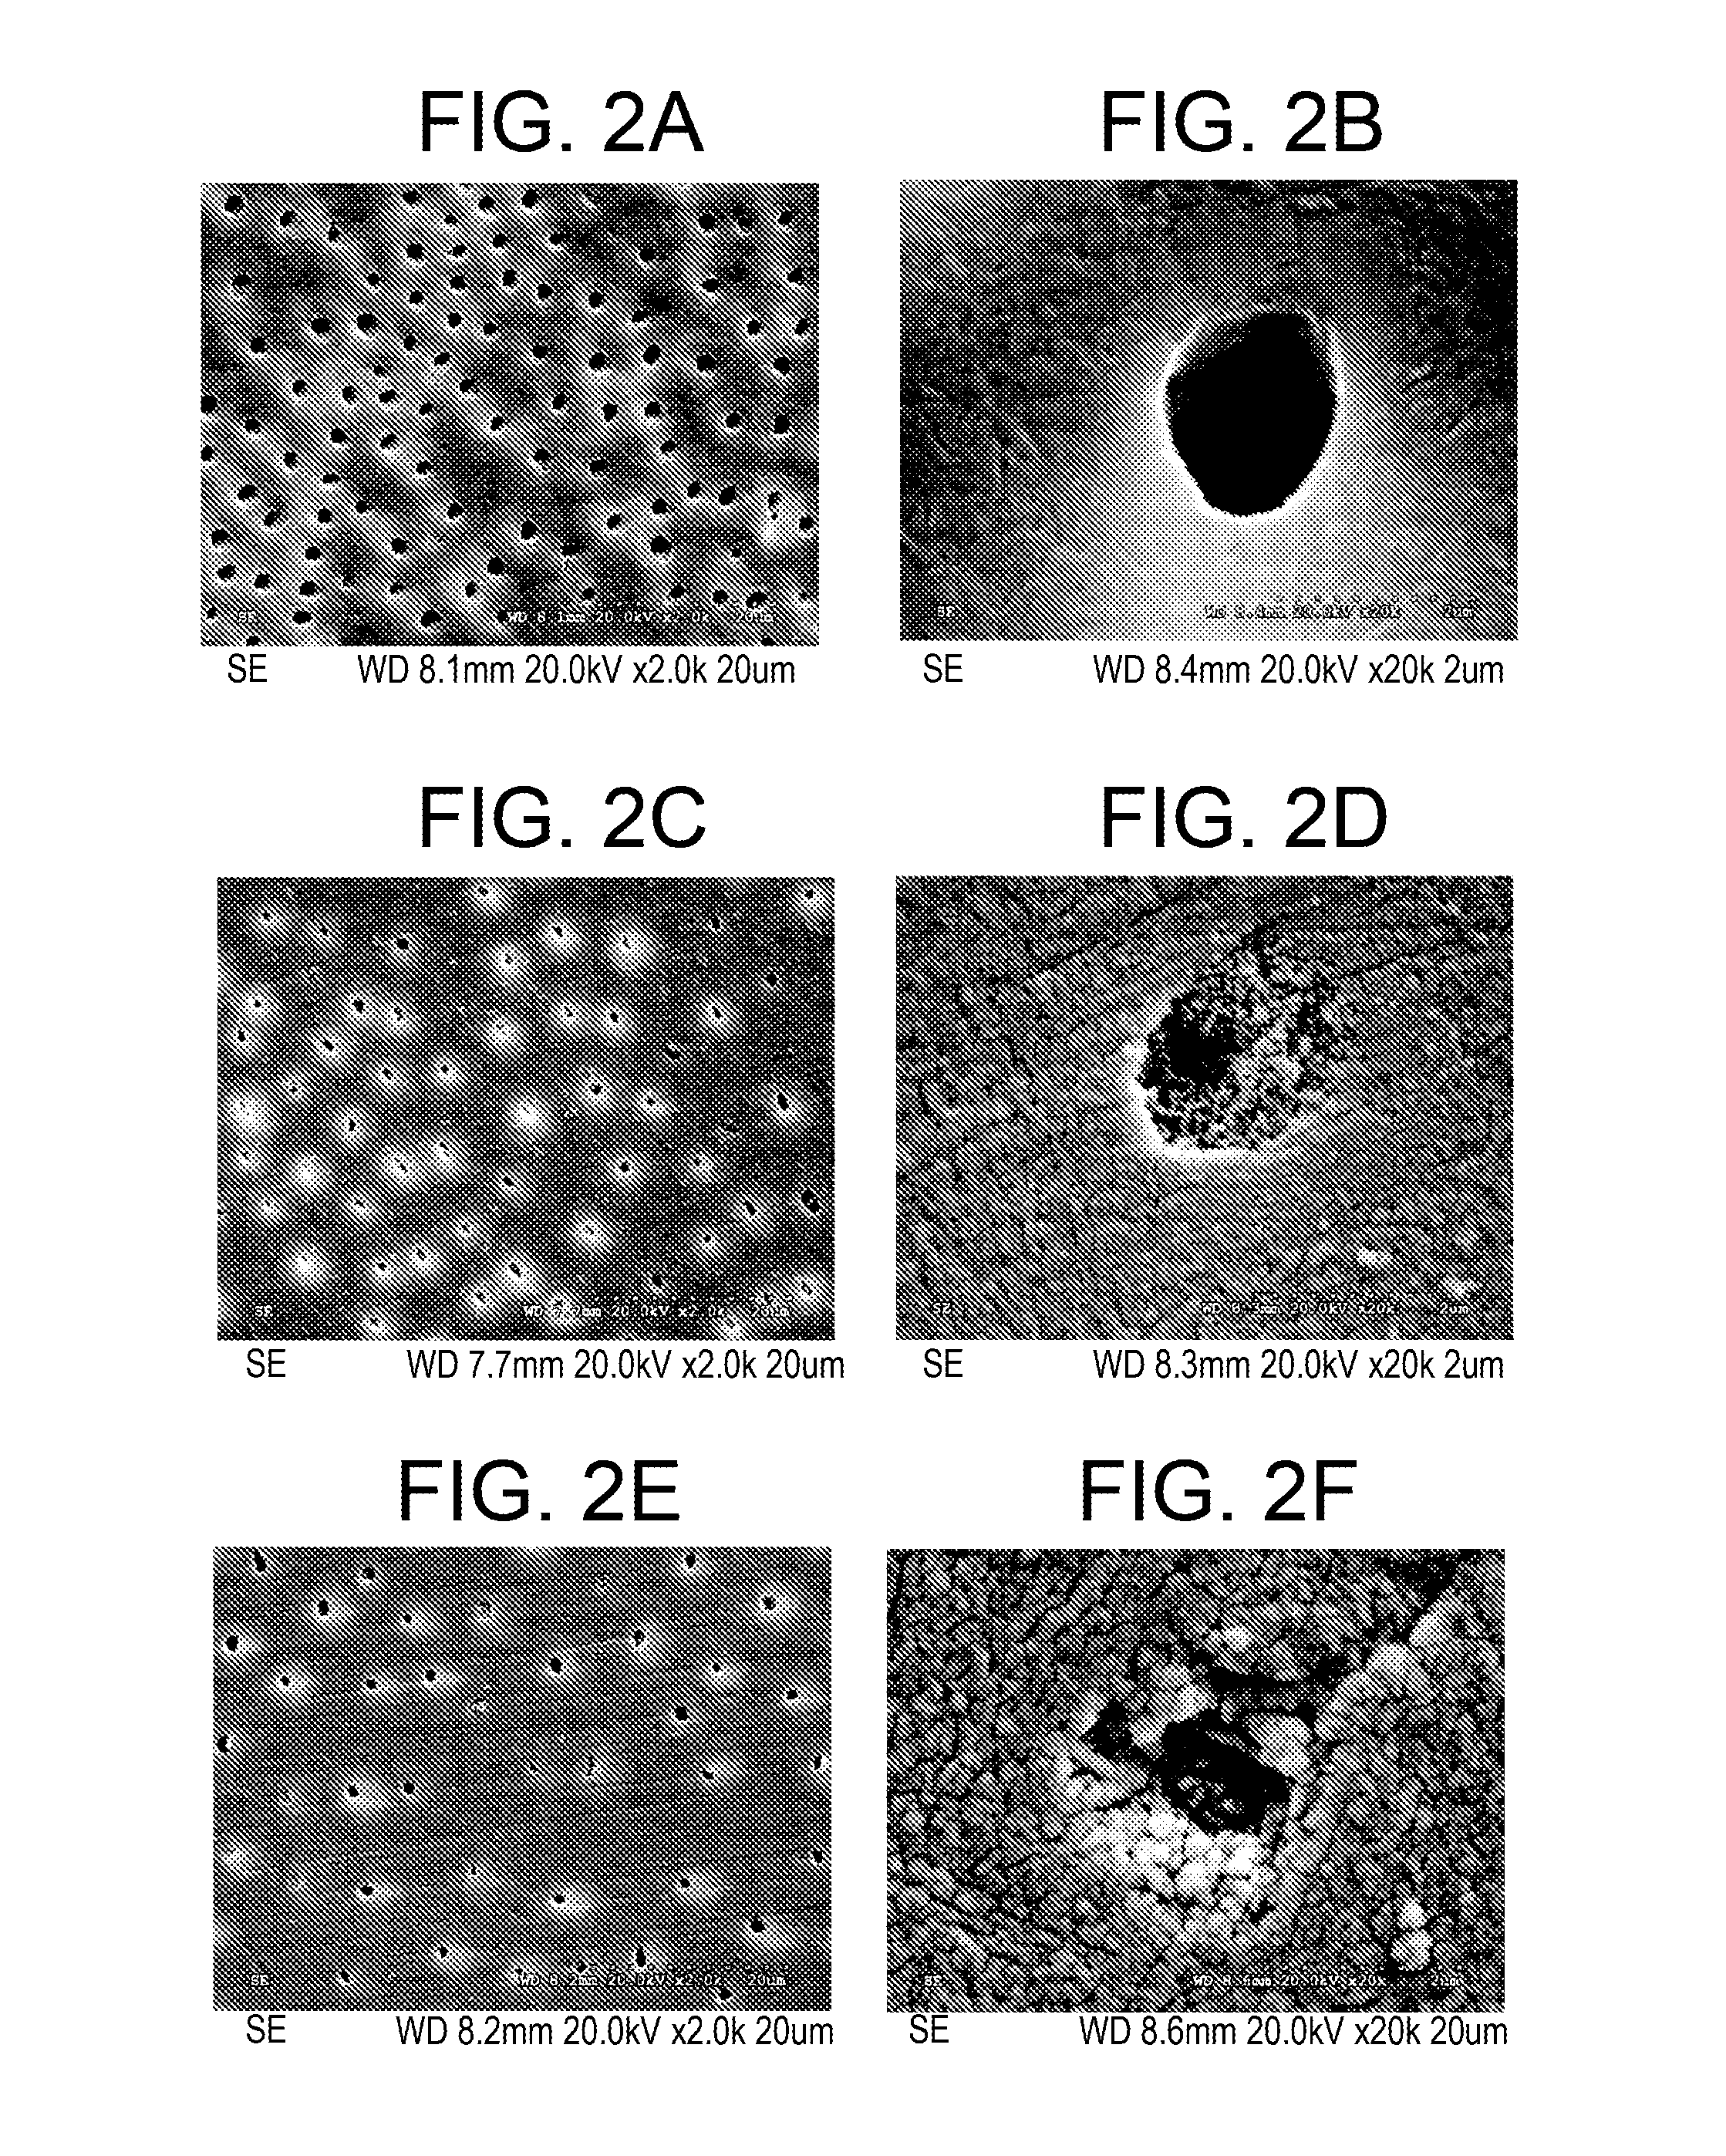 Anti-bacterial and mineralizing calcium phosphate compositions